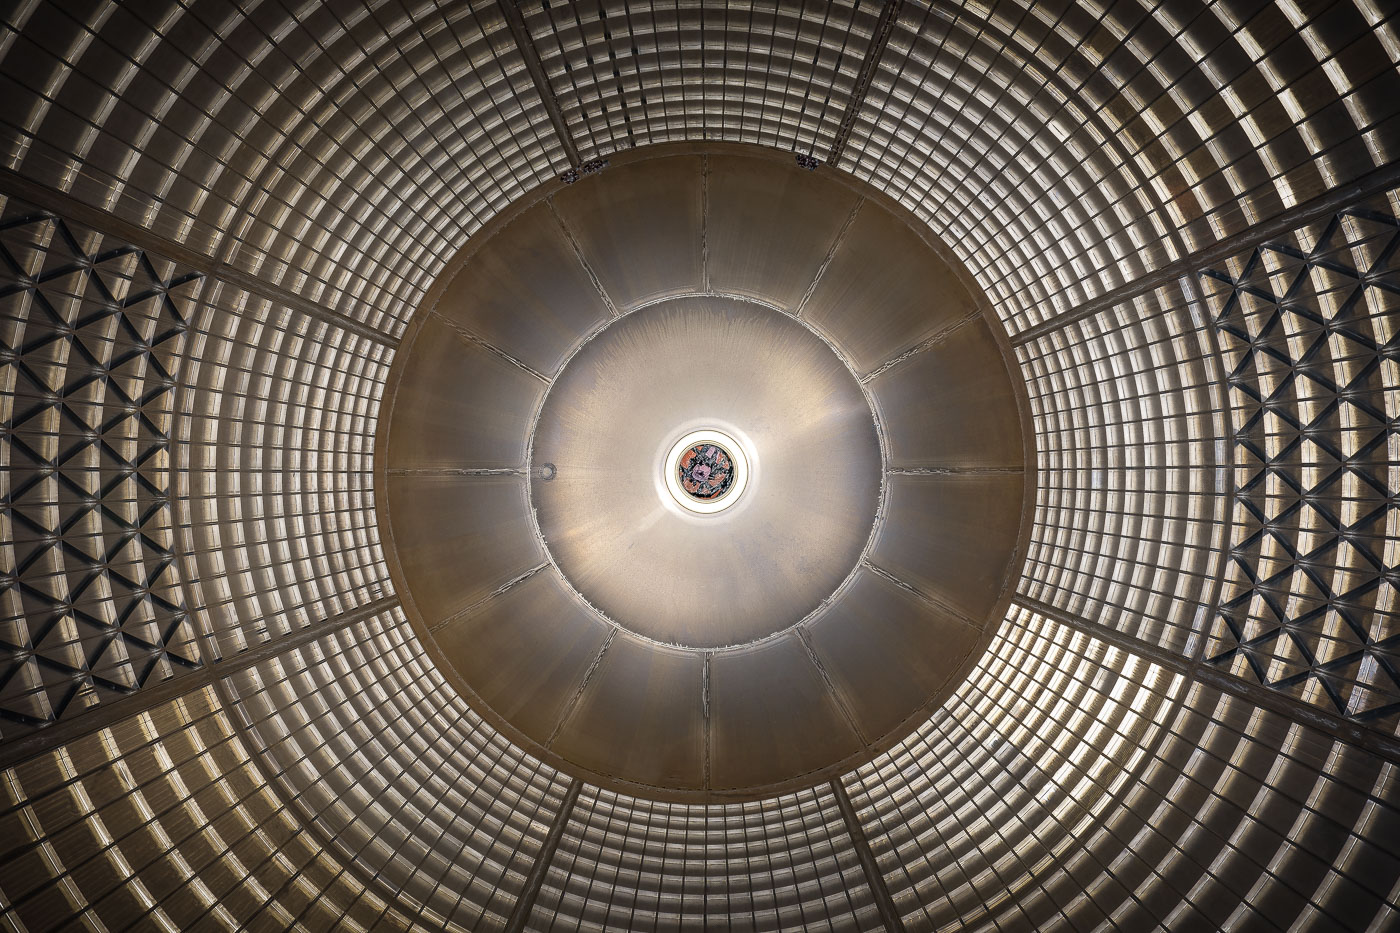 The interior of the Space Launch System (SLS) fuel tank at NASA Michoud Assembly Facility.NASA Core Stage Infographic: https://www.nasa.gov/exploration/systems/sls/multimedia/infographics/corestage101.htmlSpace Launch System: https://www.nasa.gov/exploration/systems/sls/index.html